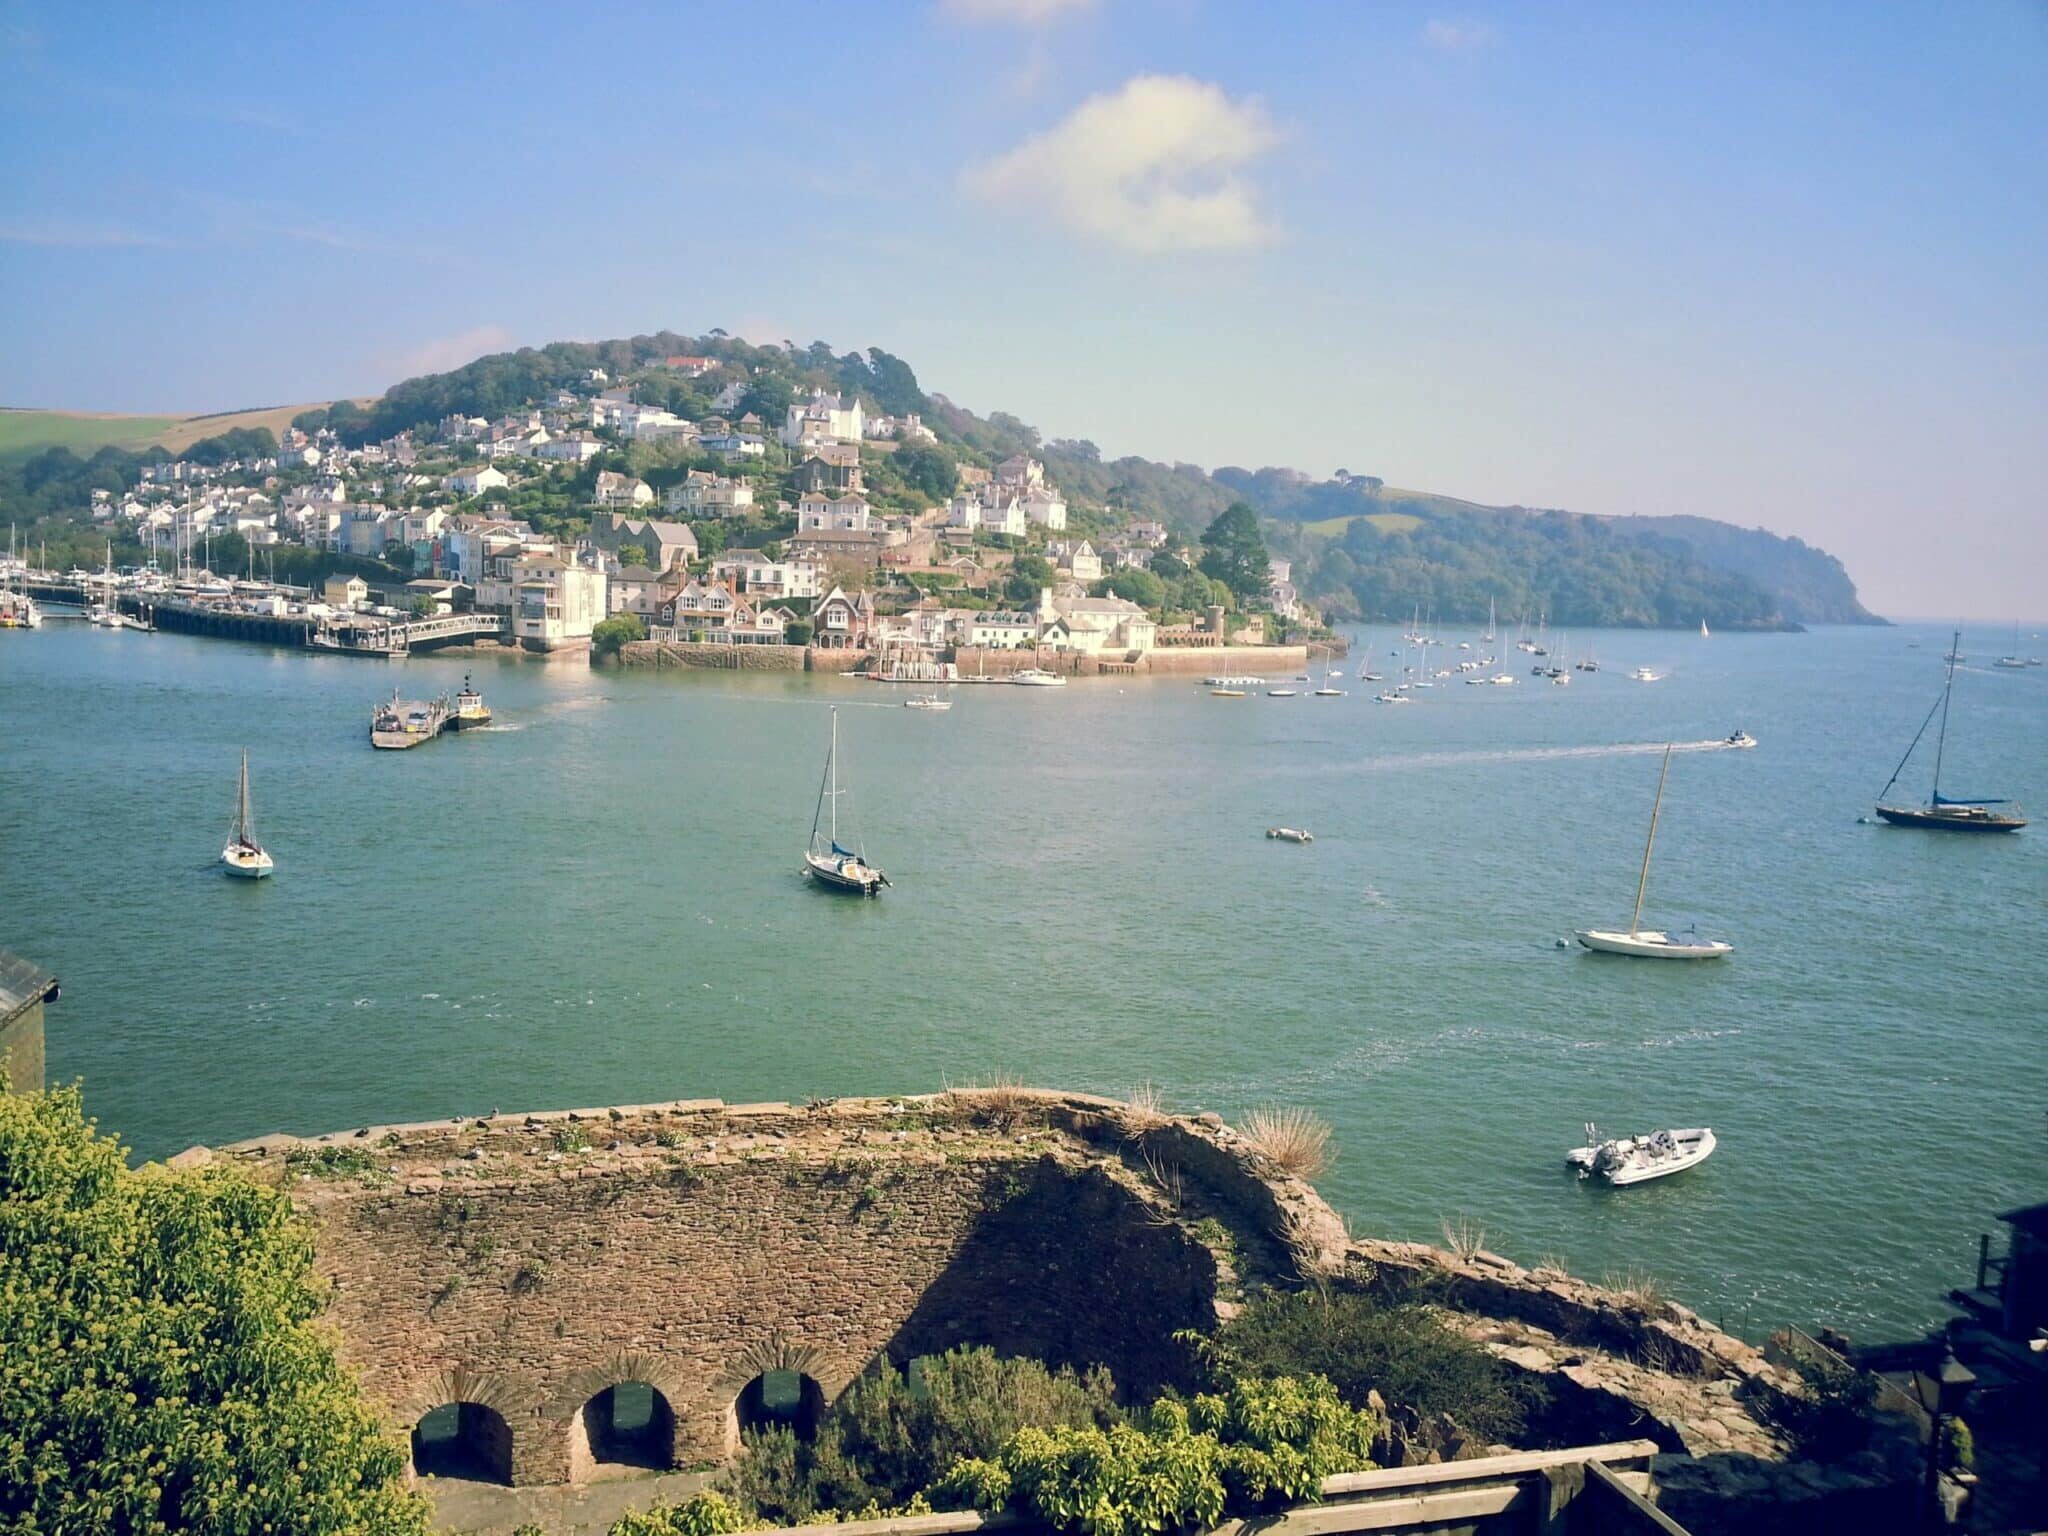 Day trip: Charming Dartmouth with the ancient Steam Railway